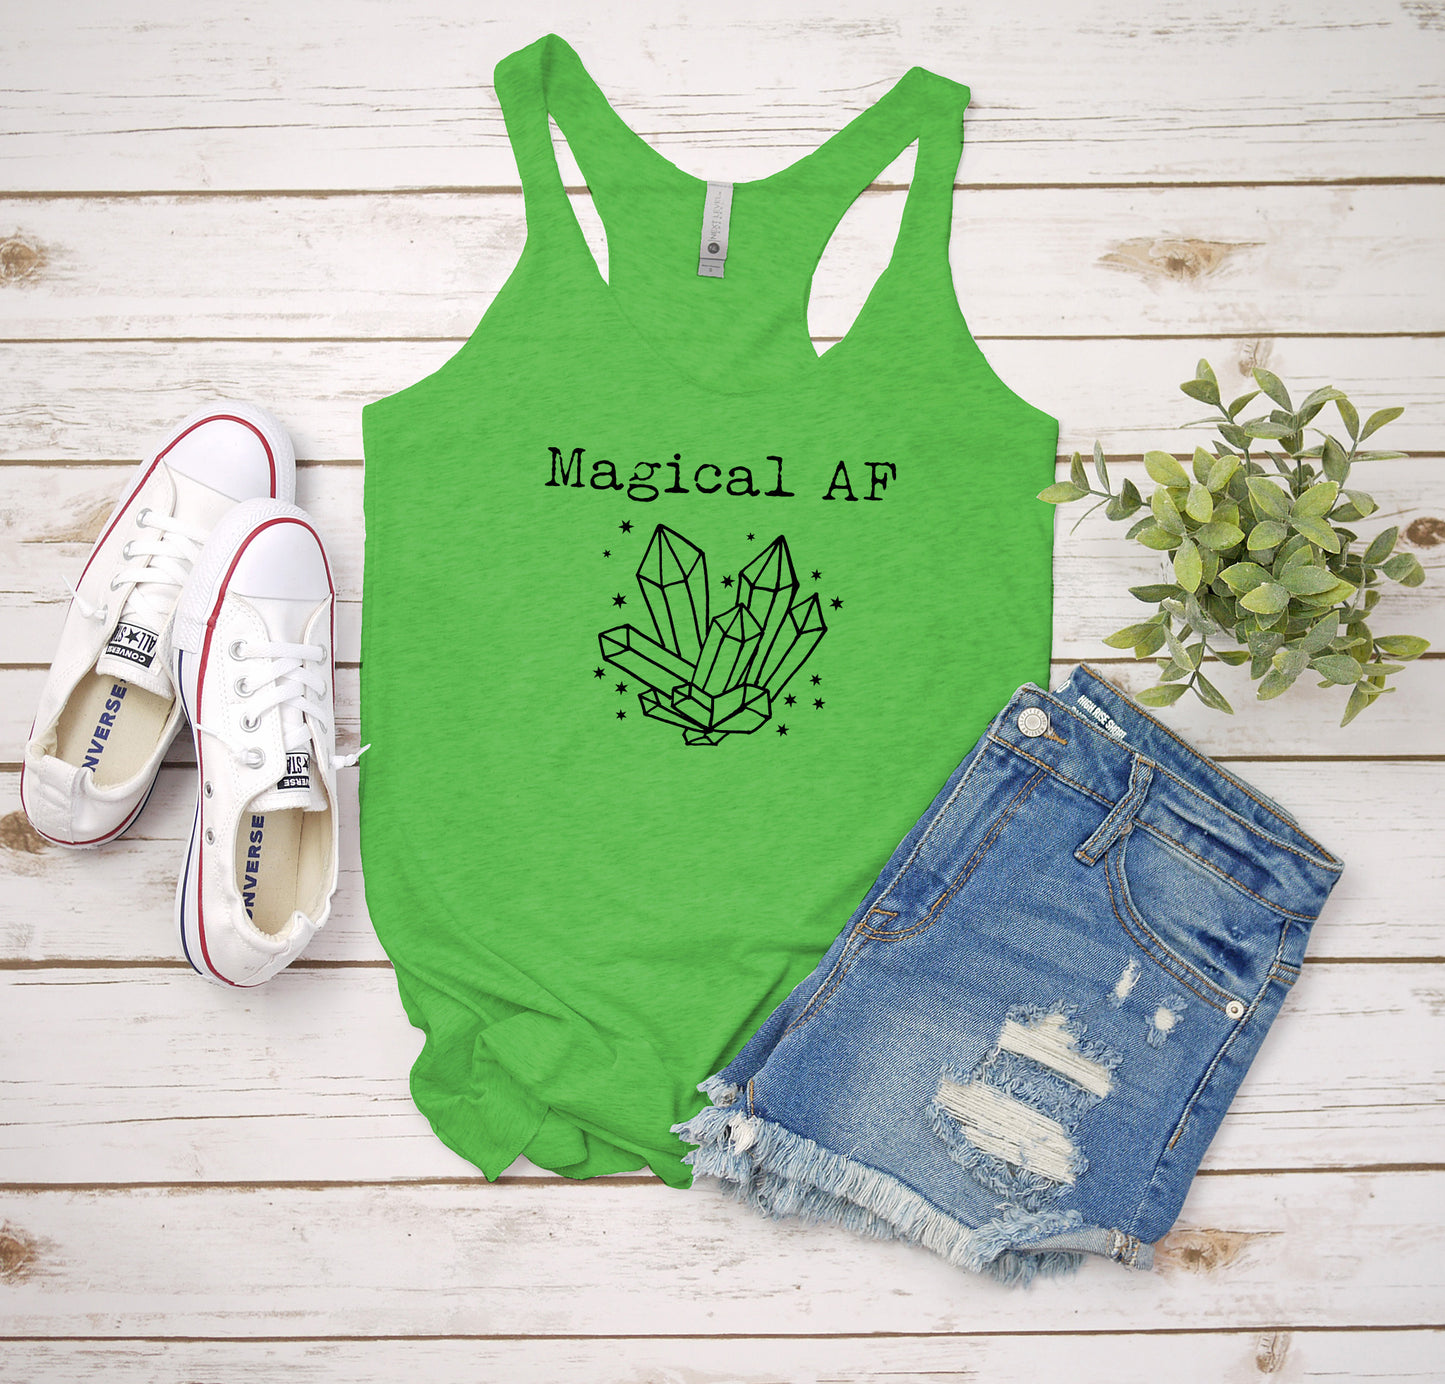 Magical AF - Women's Tank - Heather Gray, Tahiti, or Envy